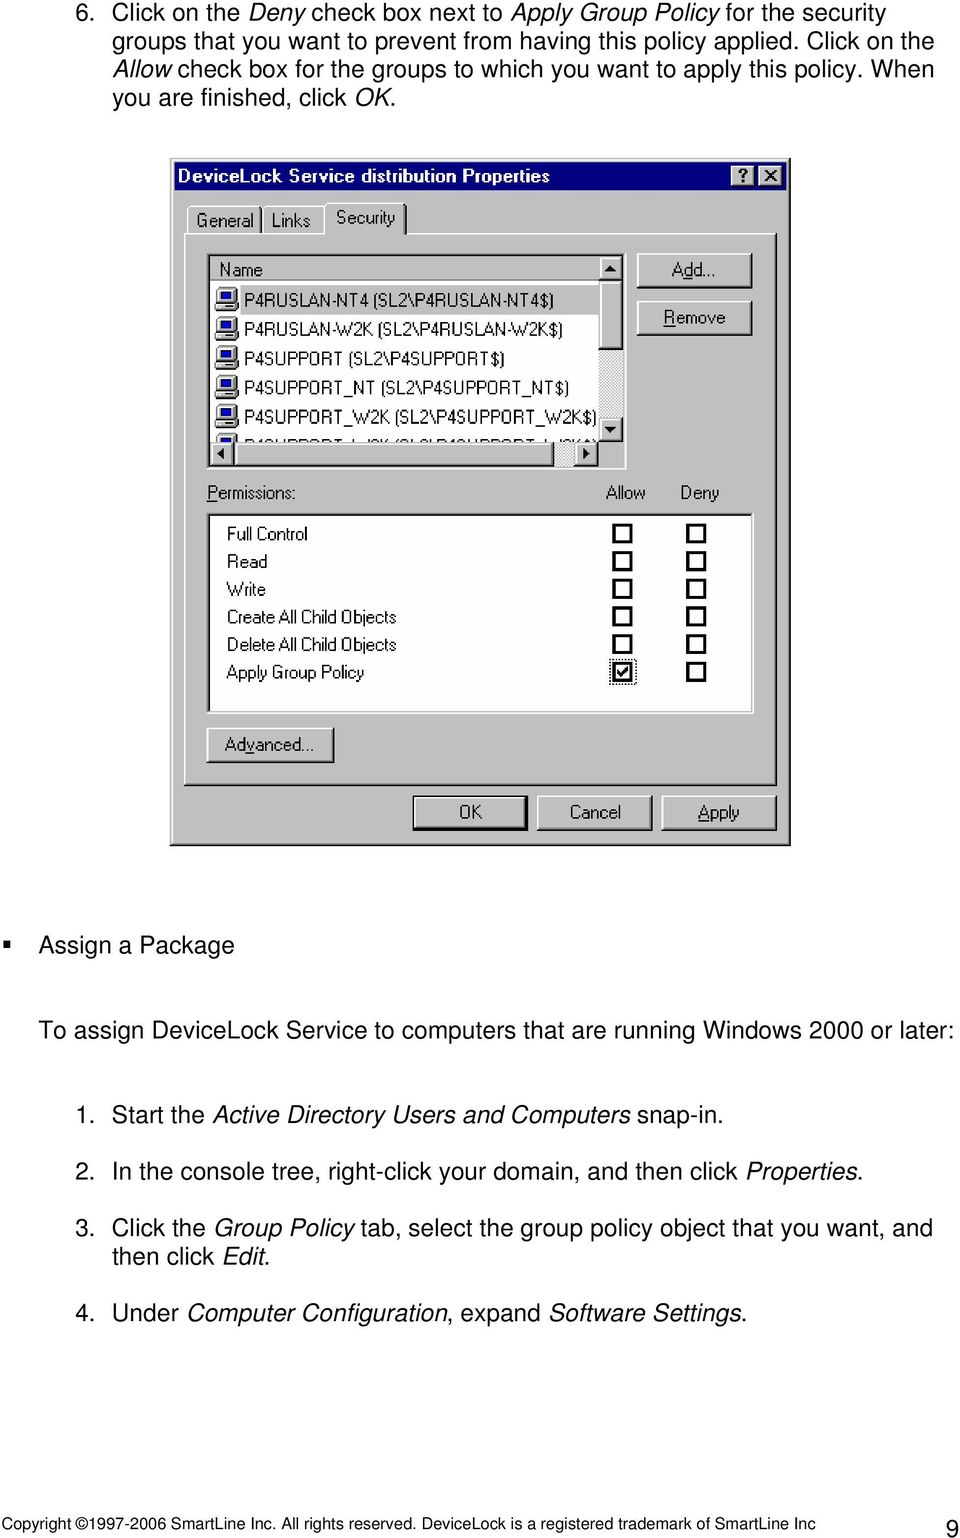 Assign a Package To assign DeviceLock Service to computers that are running Windows 2000 or later: 1. Start the Active Directory Users and Computers snap-in. 2. In the console tree, right-click your domain, and then click Properties.